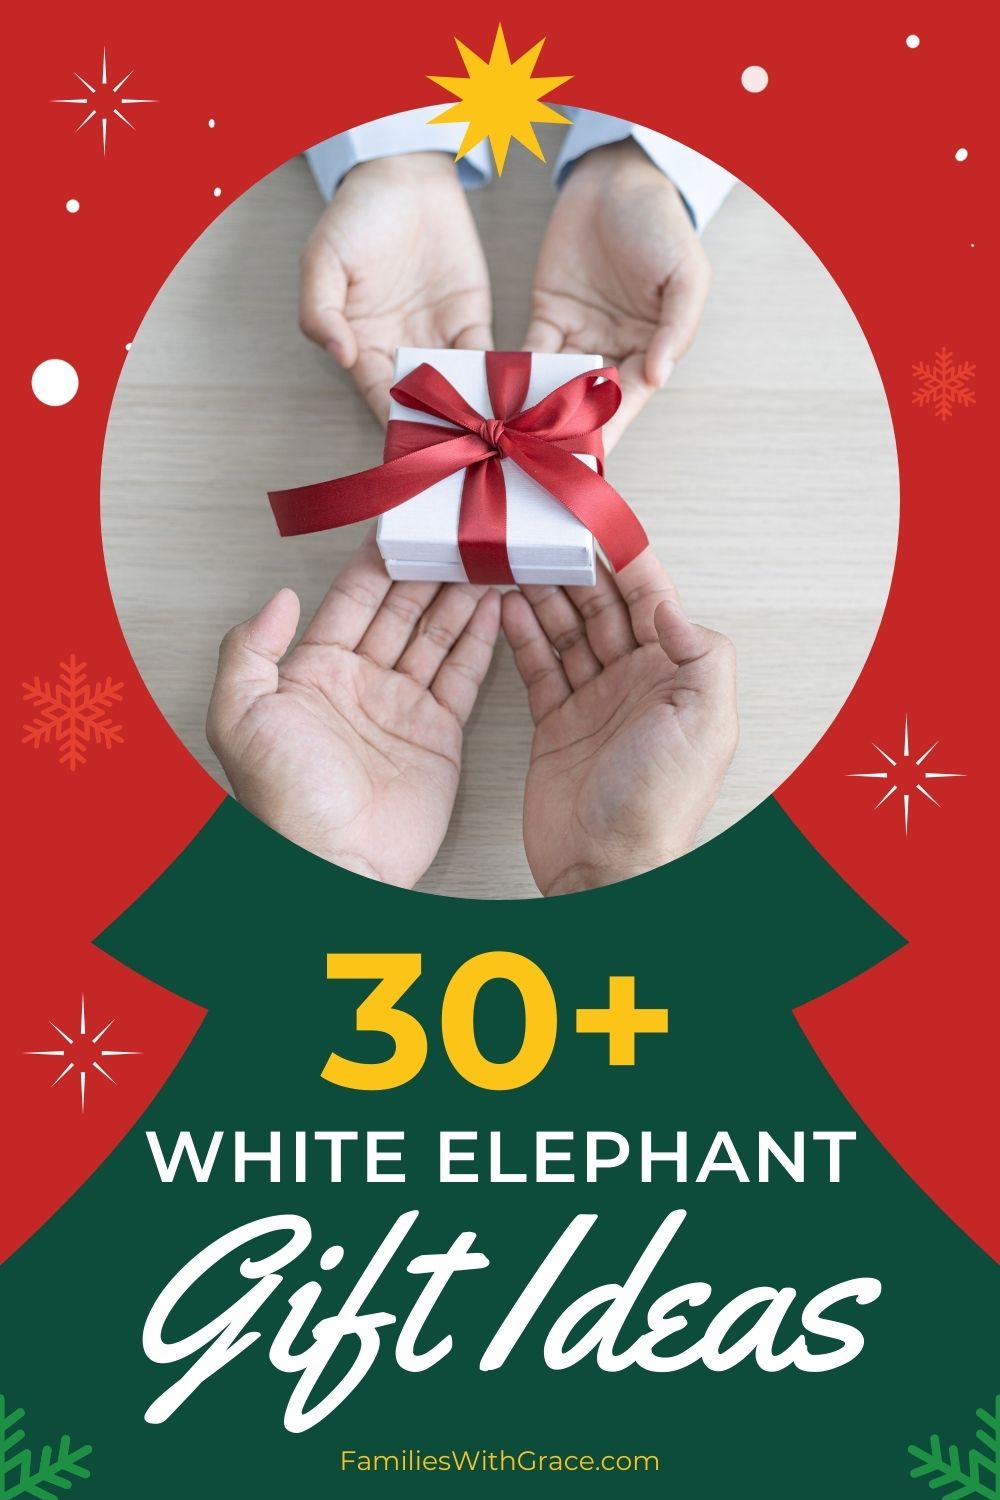 The Ultimate White Elephant Gift Guide for 2019